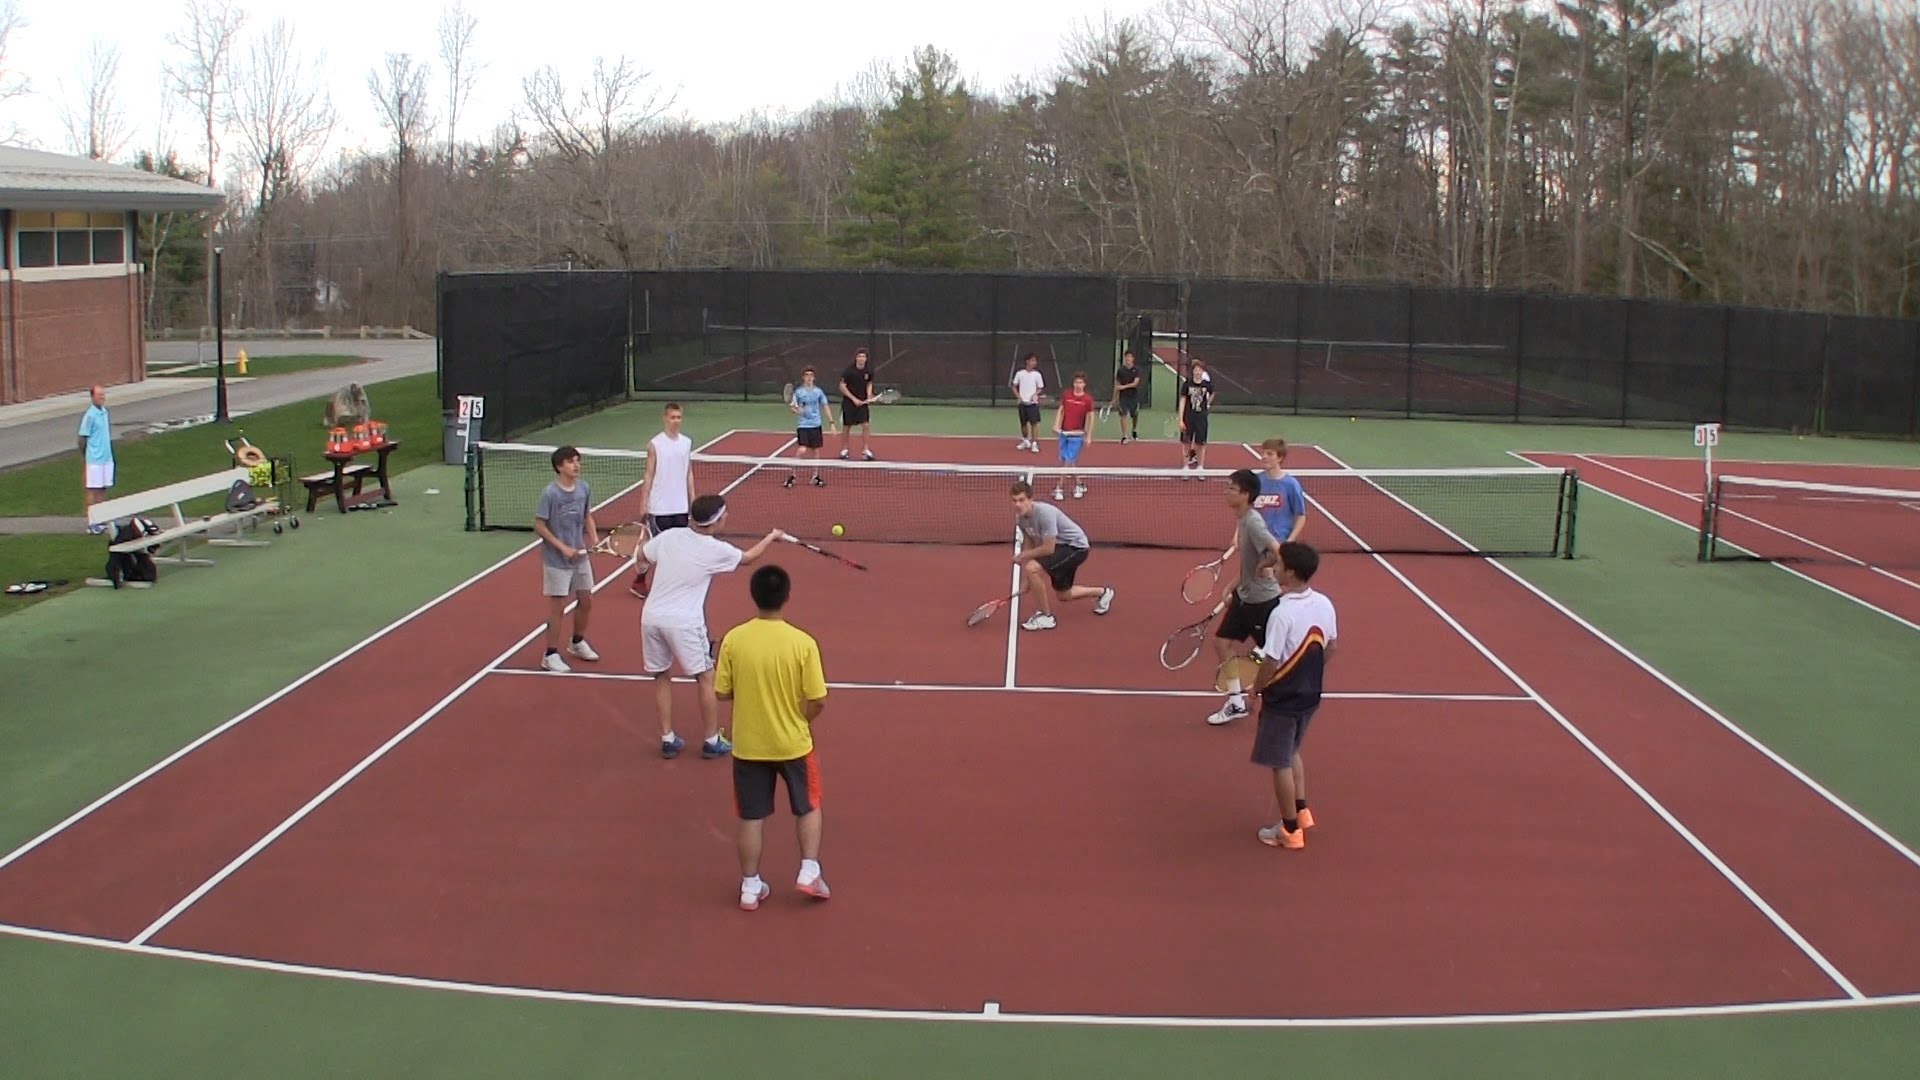 Tennis Game for Large Groups - All Touch Volleyball Tennis - YouTube